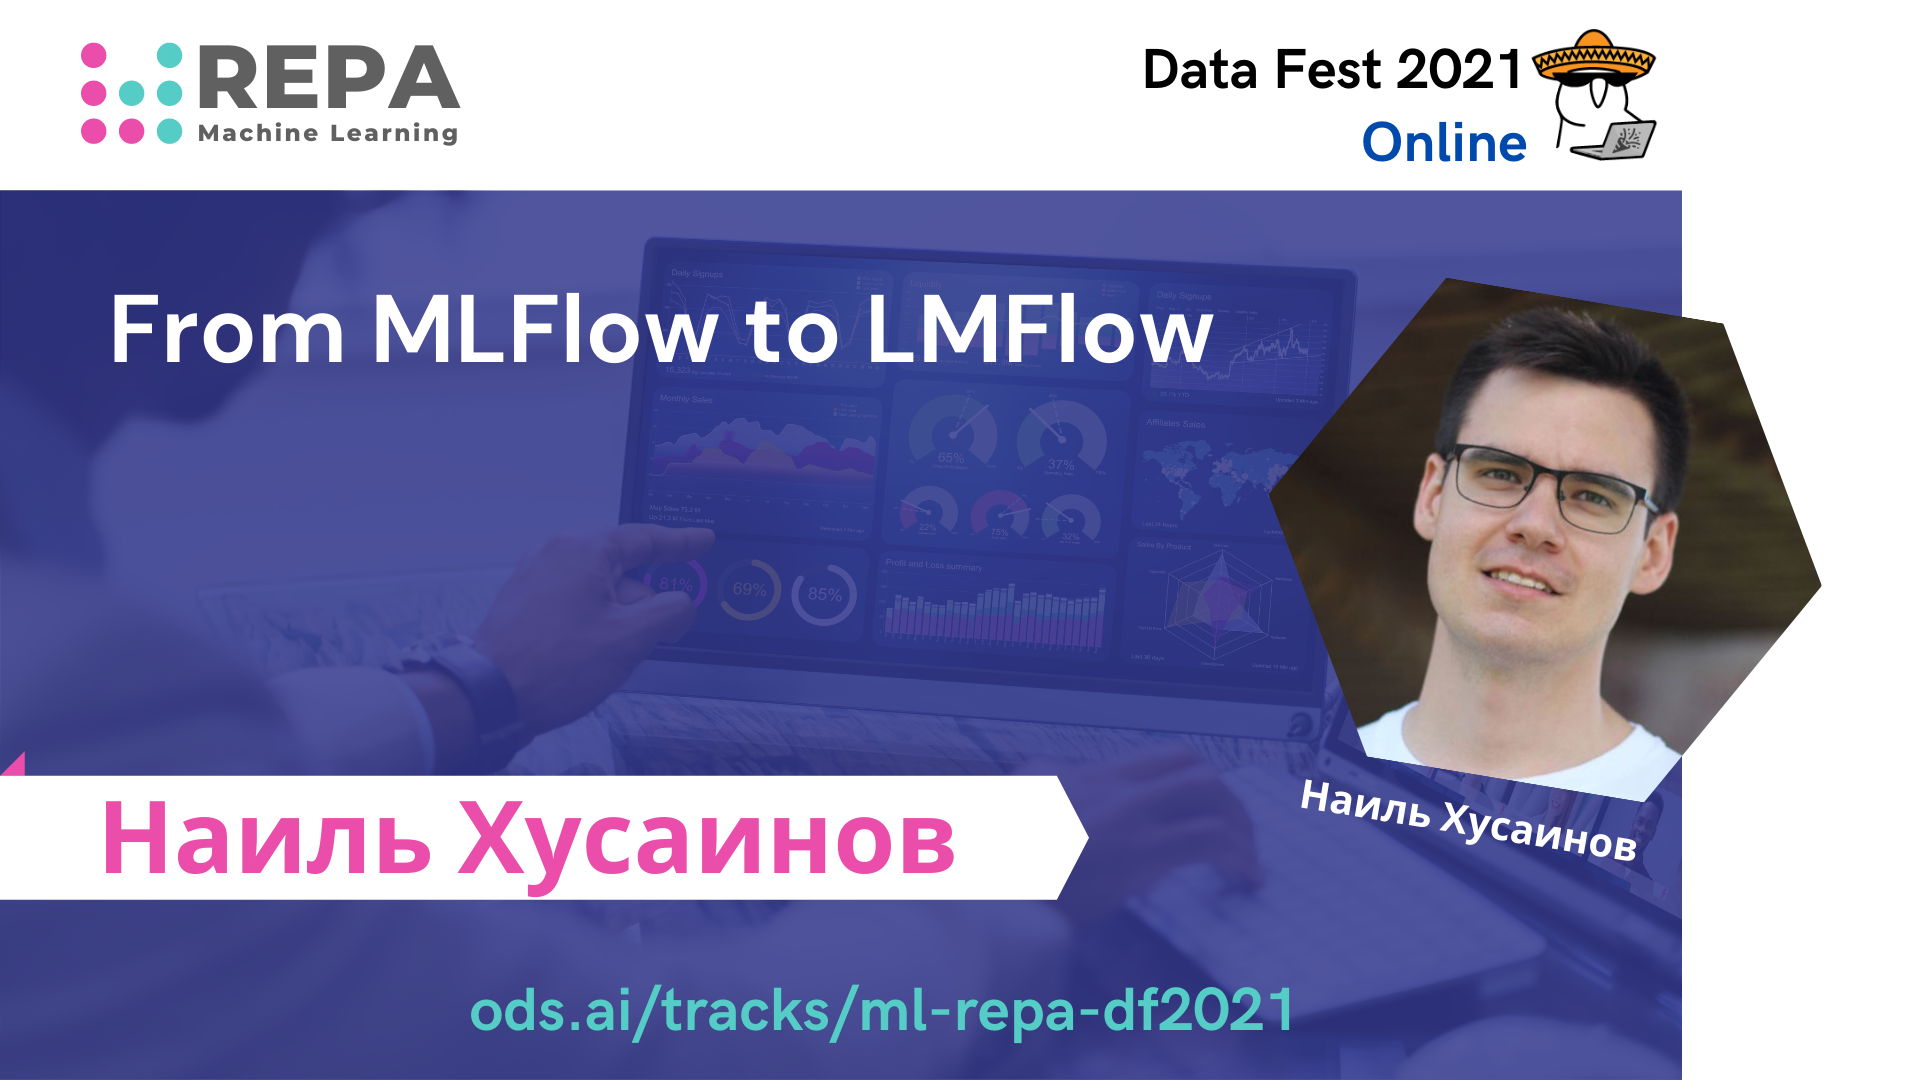 From MLFlow to LMFlow